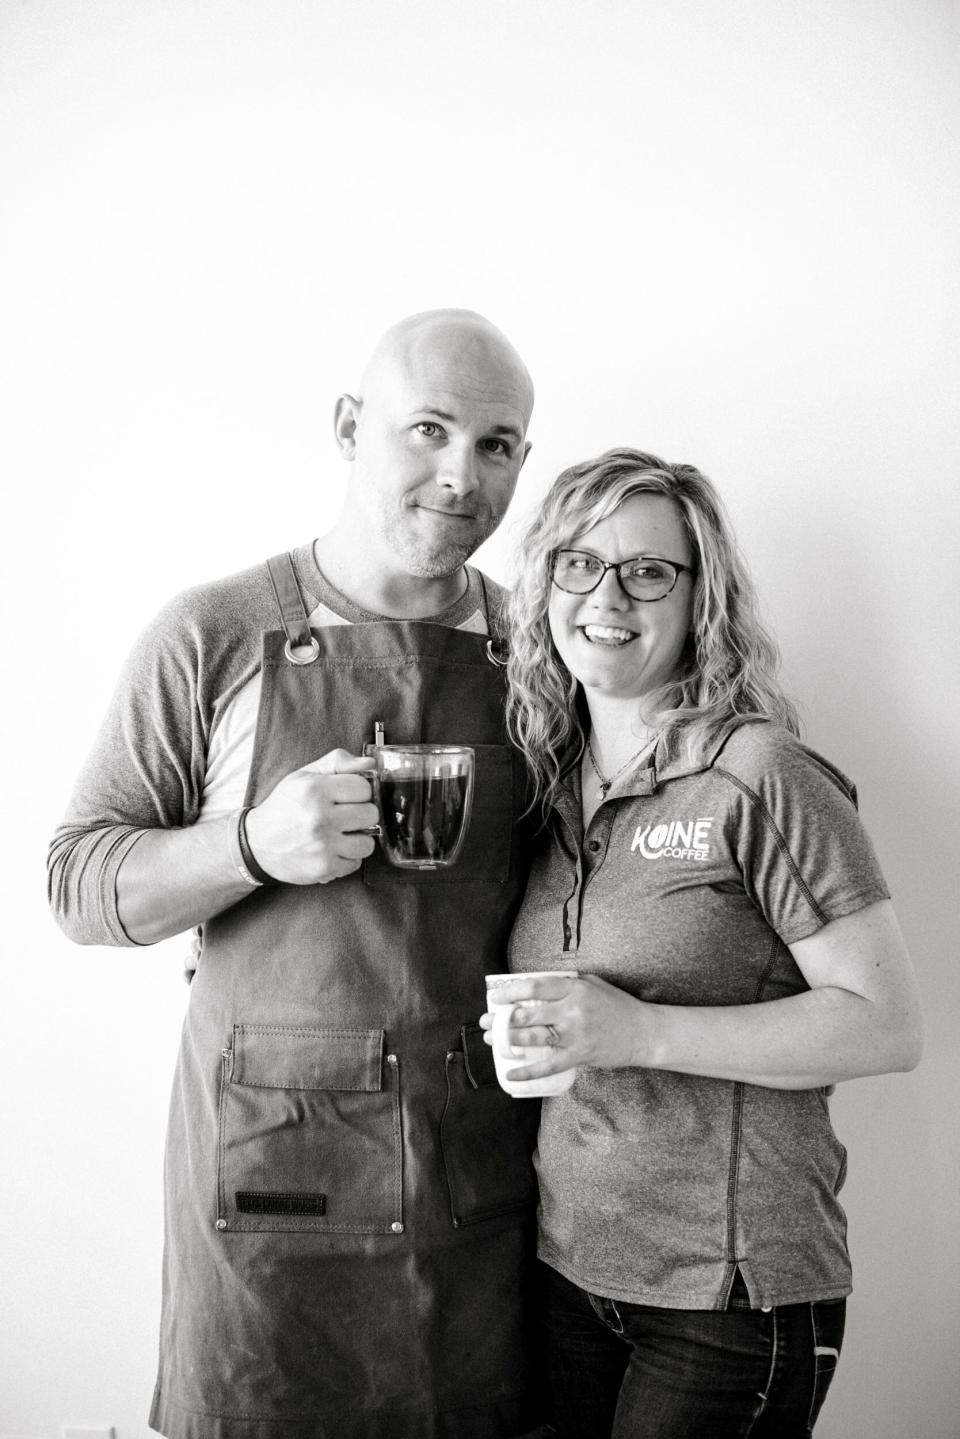 Geoff and Aimee Weaver own Koine Coffee. Their daughter Gracie also works with the family team.